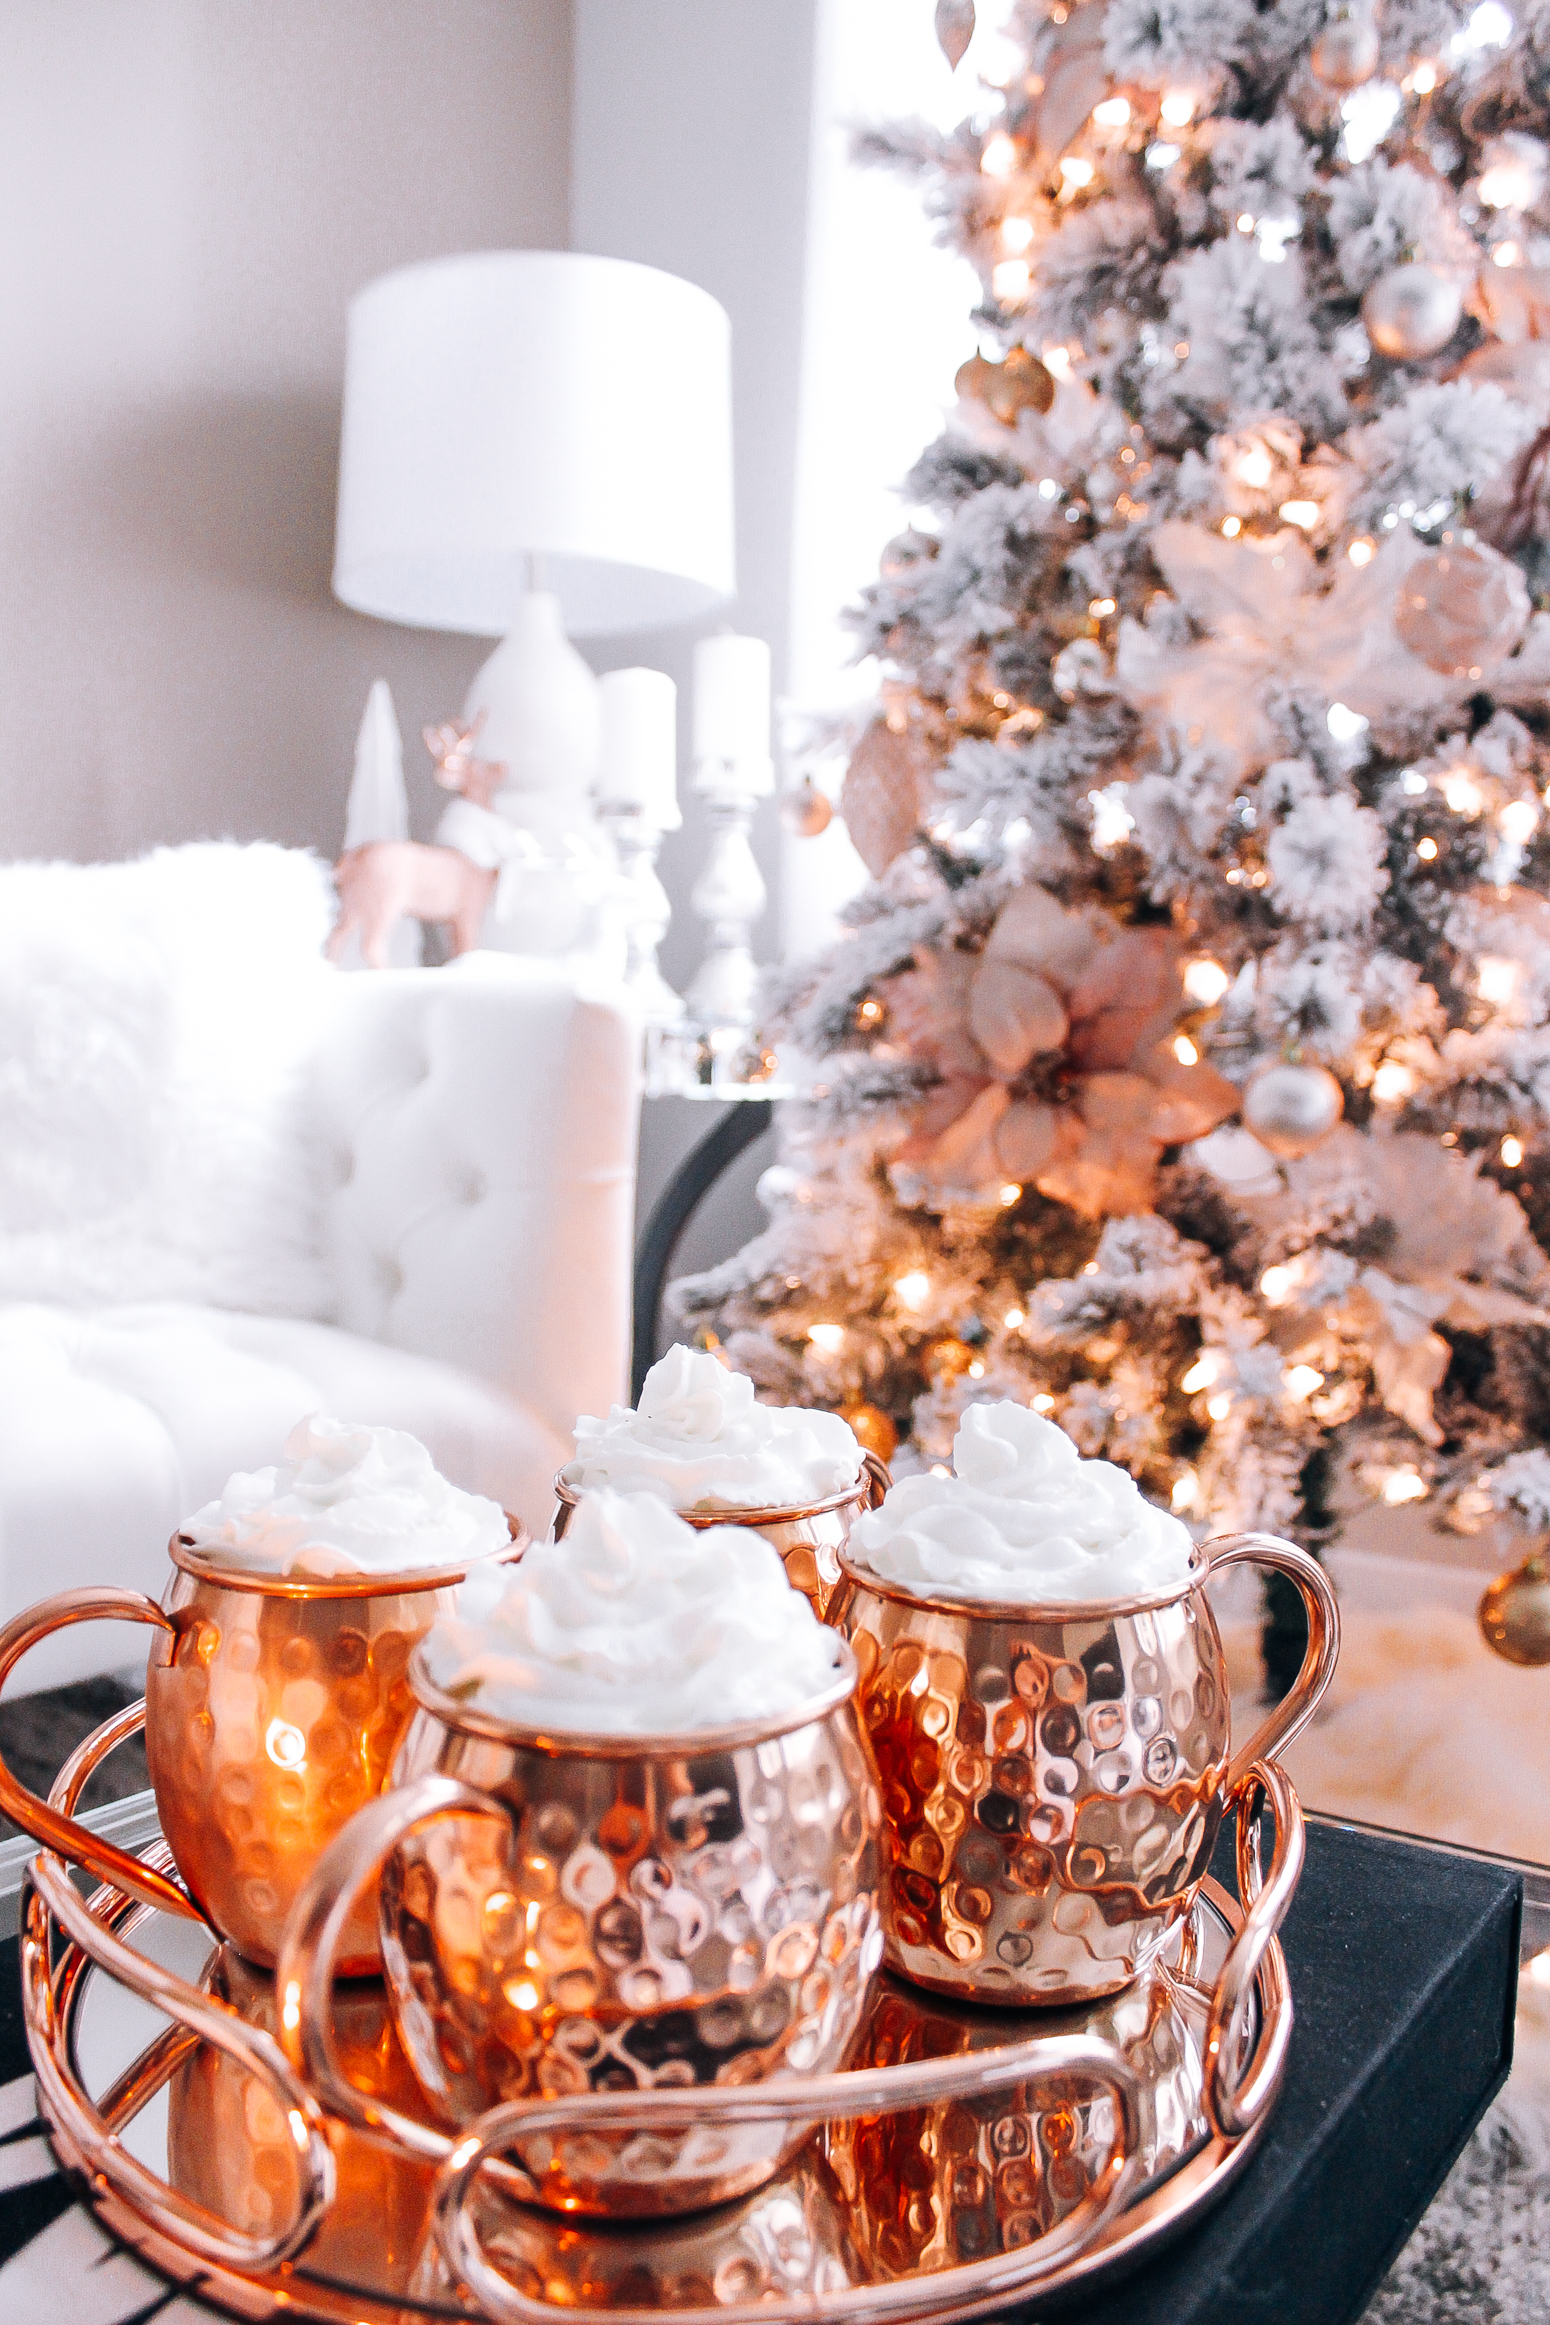 Christmas Decor | Blondie in the City | Pink & Rose Gold Christmas Decor | Hot Chocolate in Moscow Mules